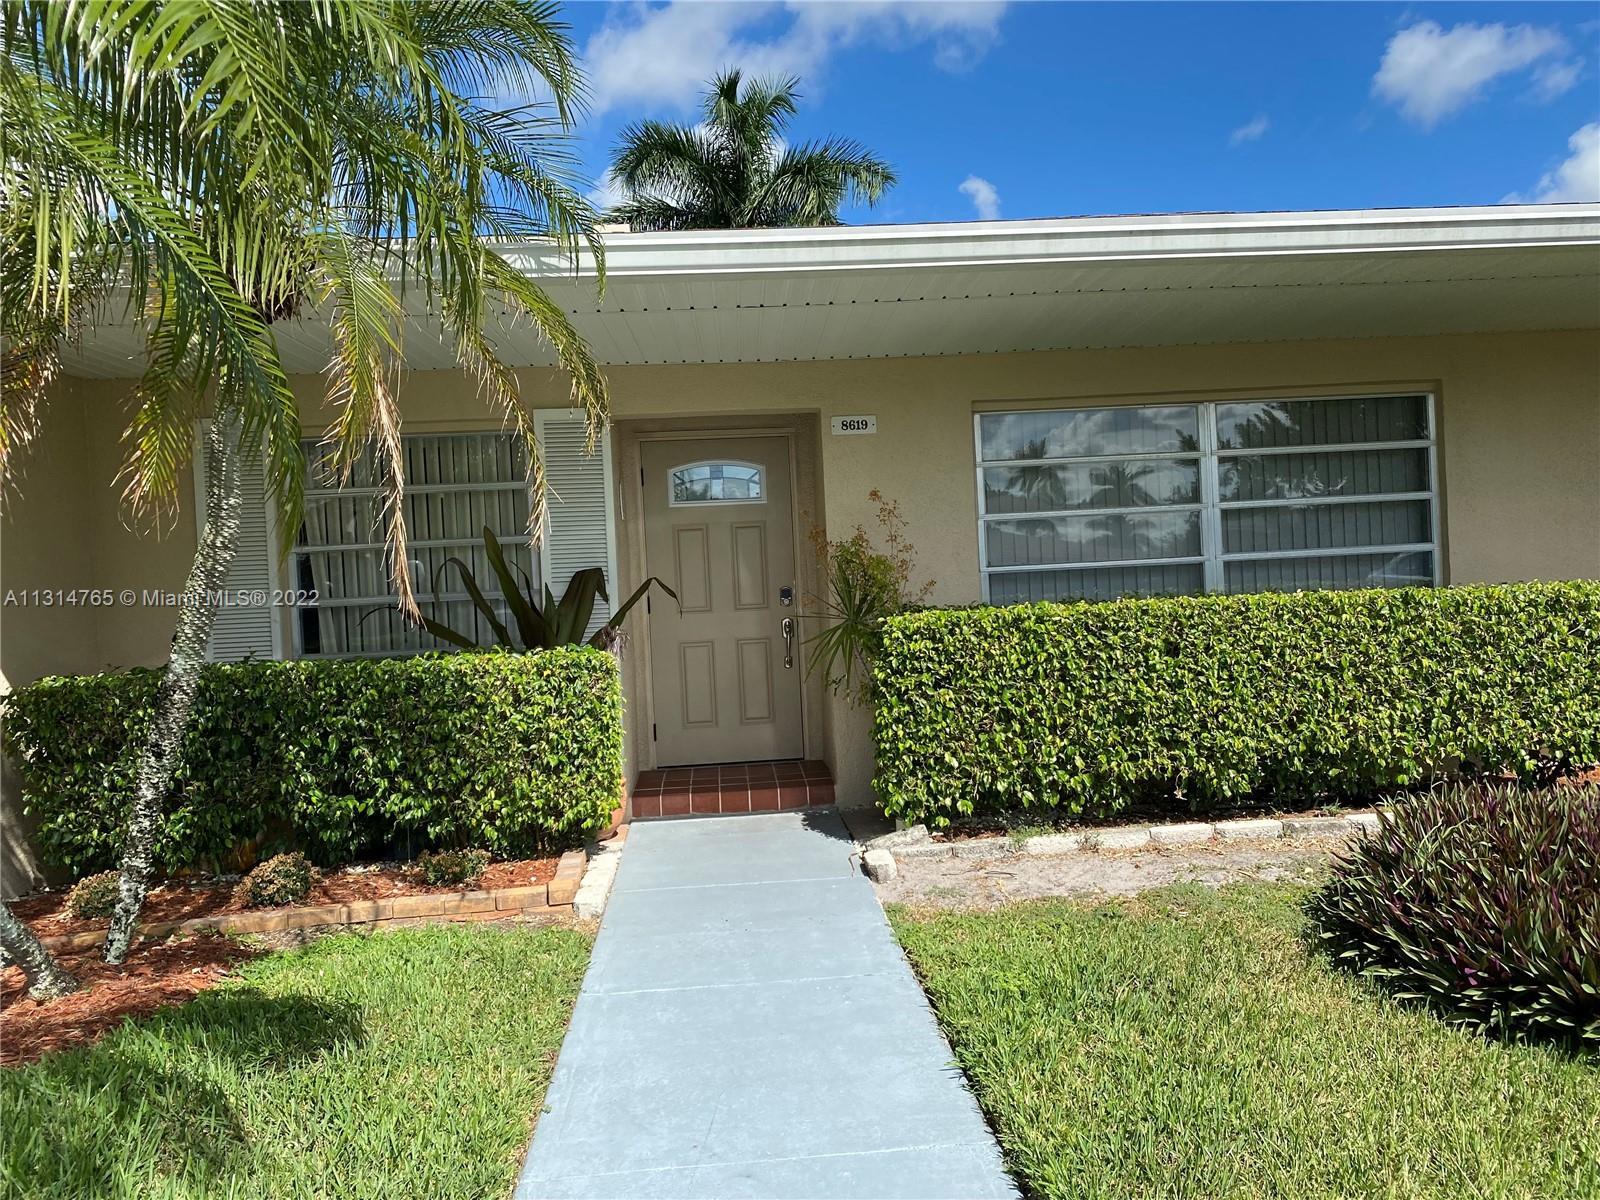 Location location in the heart of Boca Raton at an Affordable price. Guard gated community  55+. Don